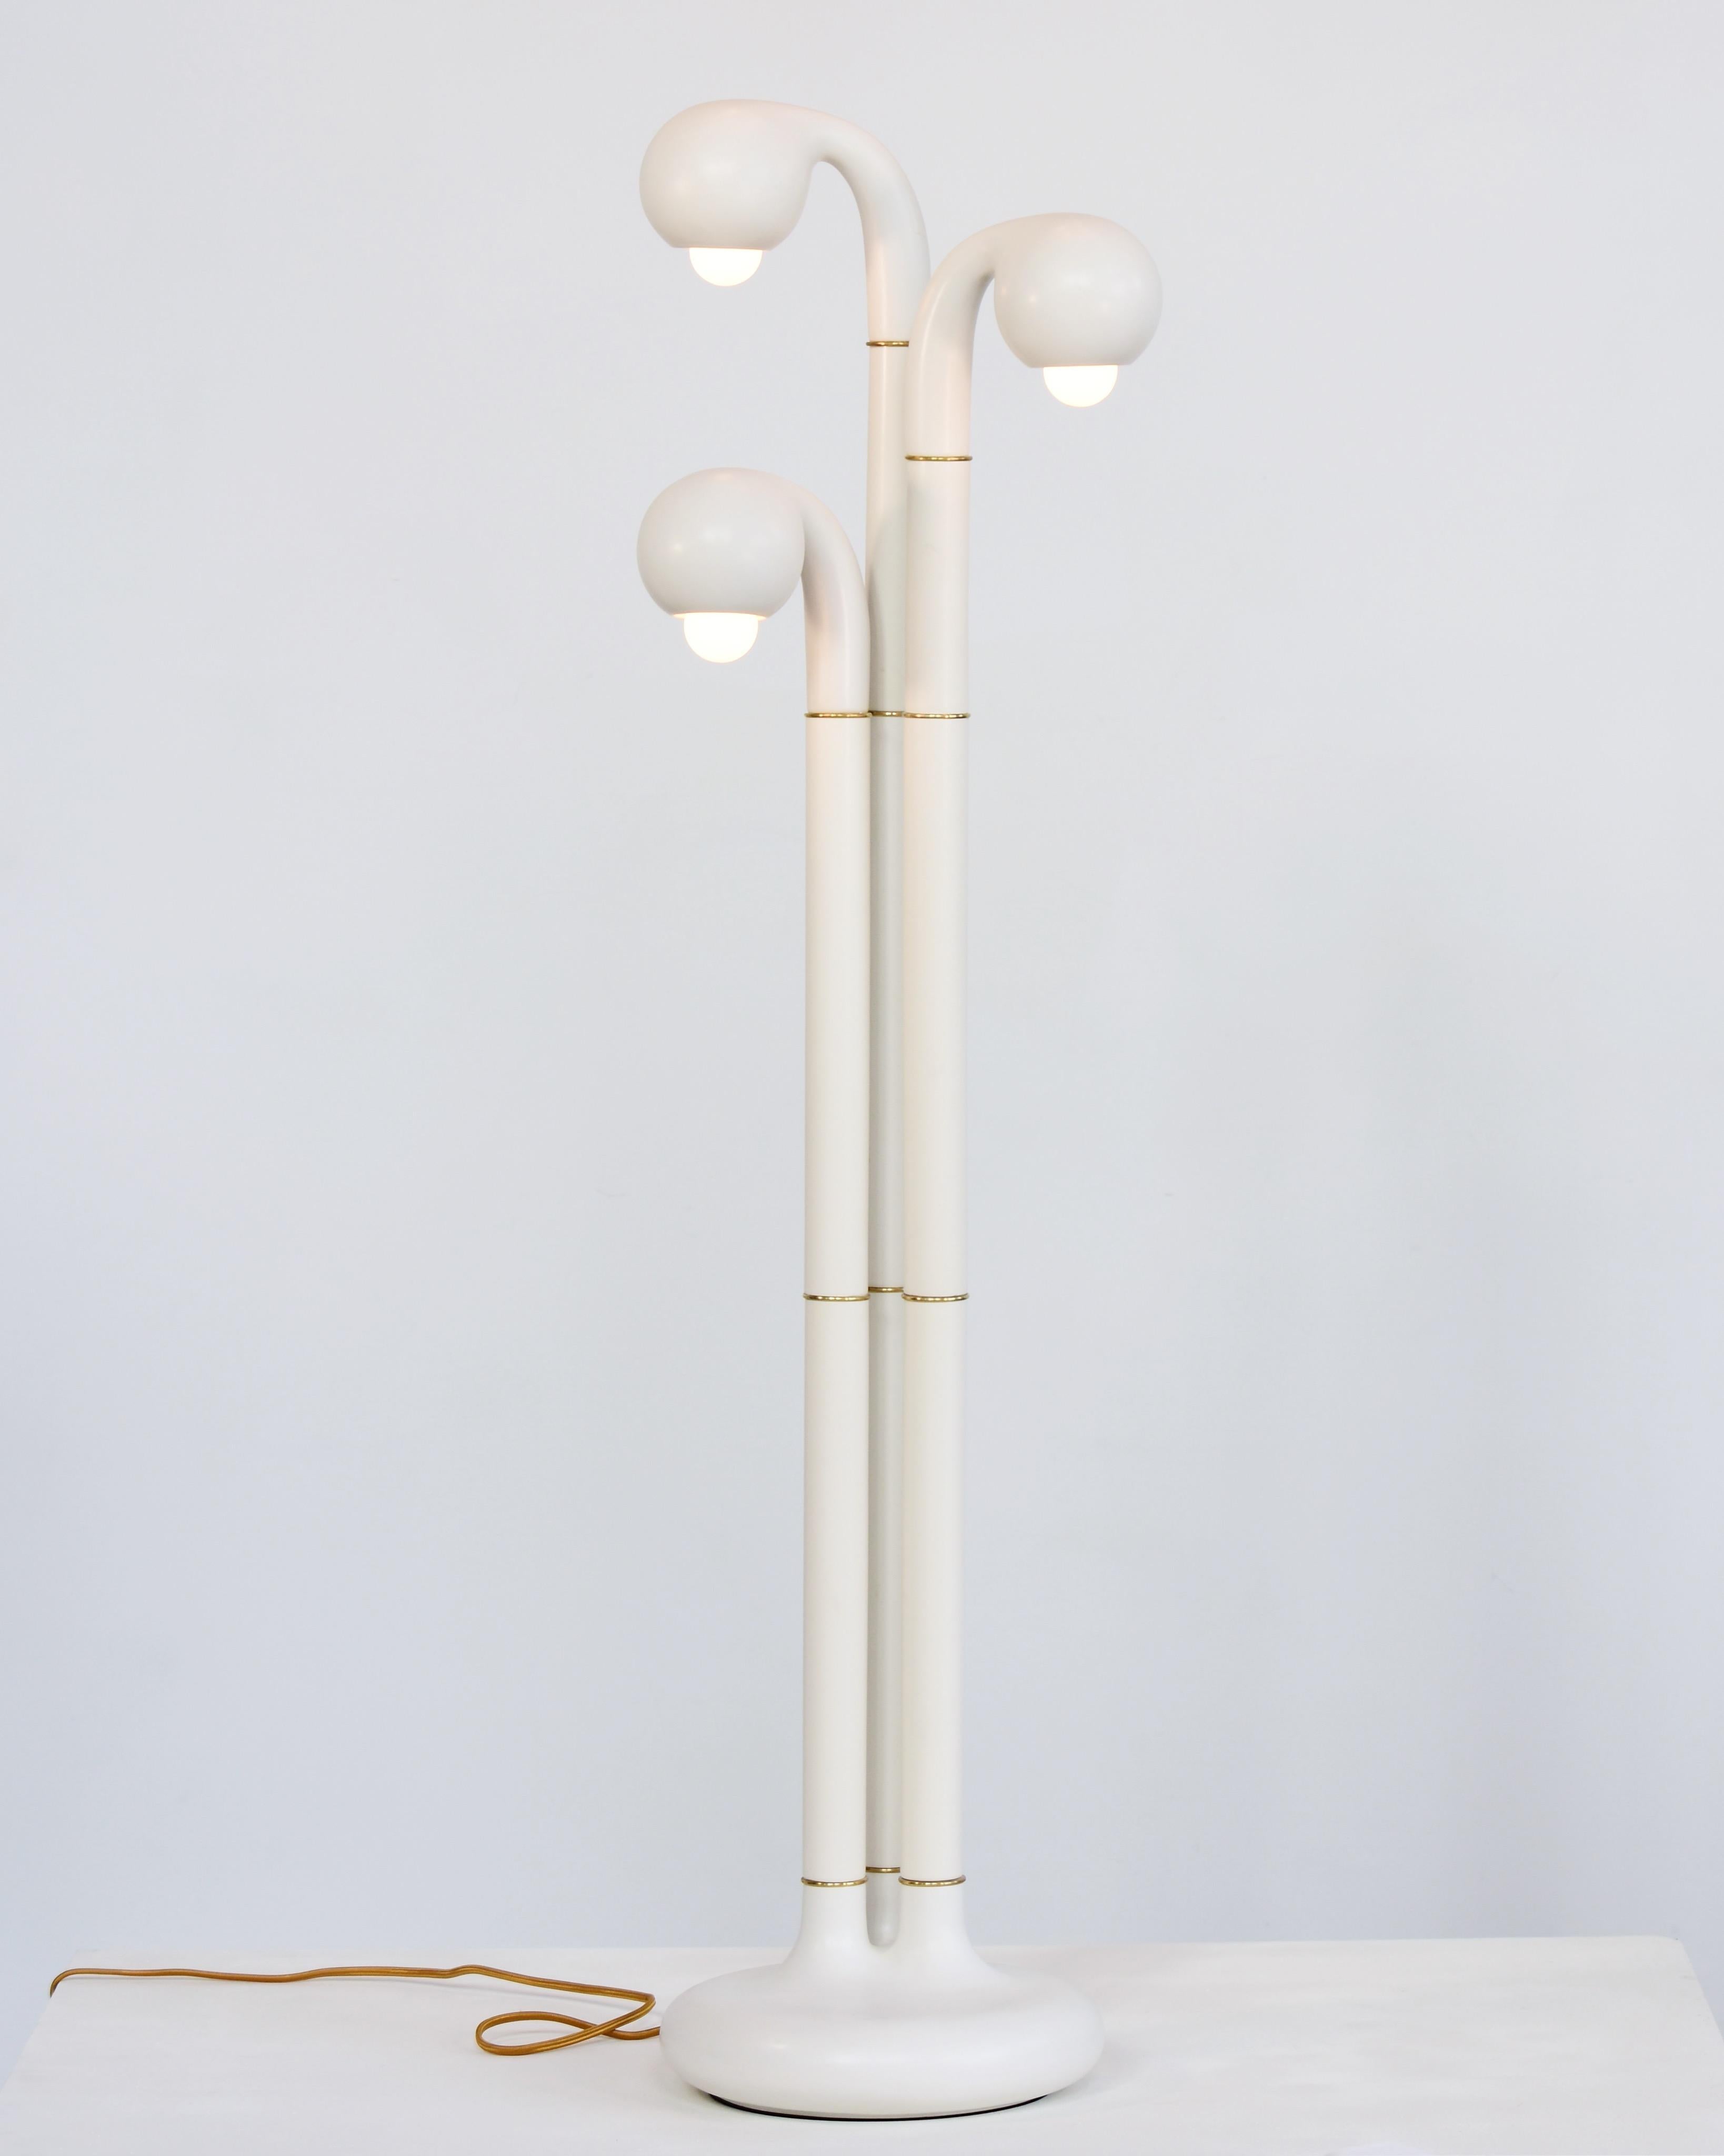 ENTLER Ceramic 3-Globe Floor Lamp.

Made to order in our Los Angeles studio.

Glazes available in gloss pink, matte white, matte black, gloss black, matte pink, gloss white, yellow, charcoal, blue, burnt orange, chartreuse, cherry, lavender, and